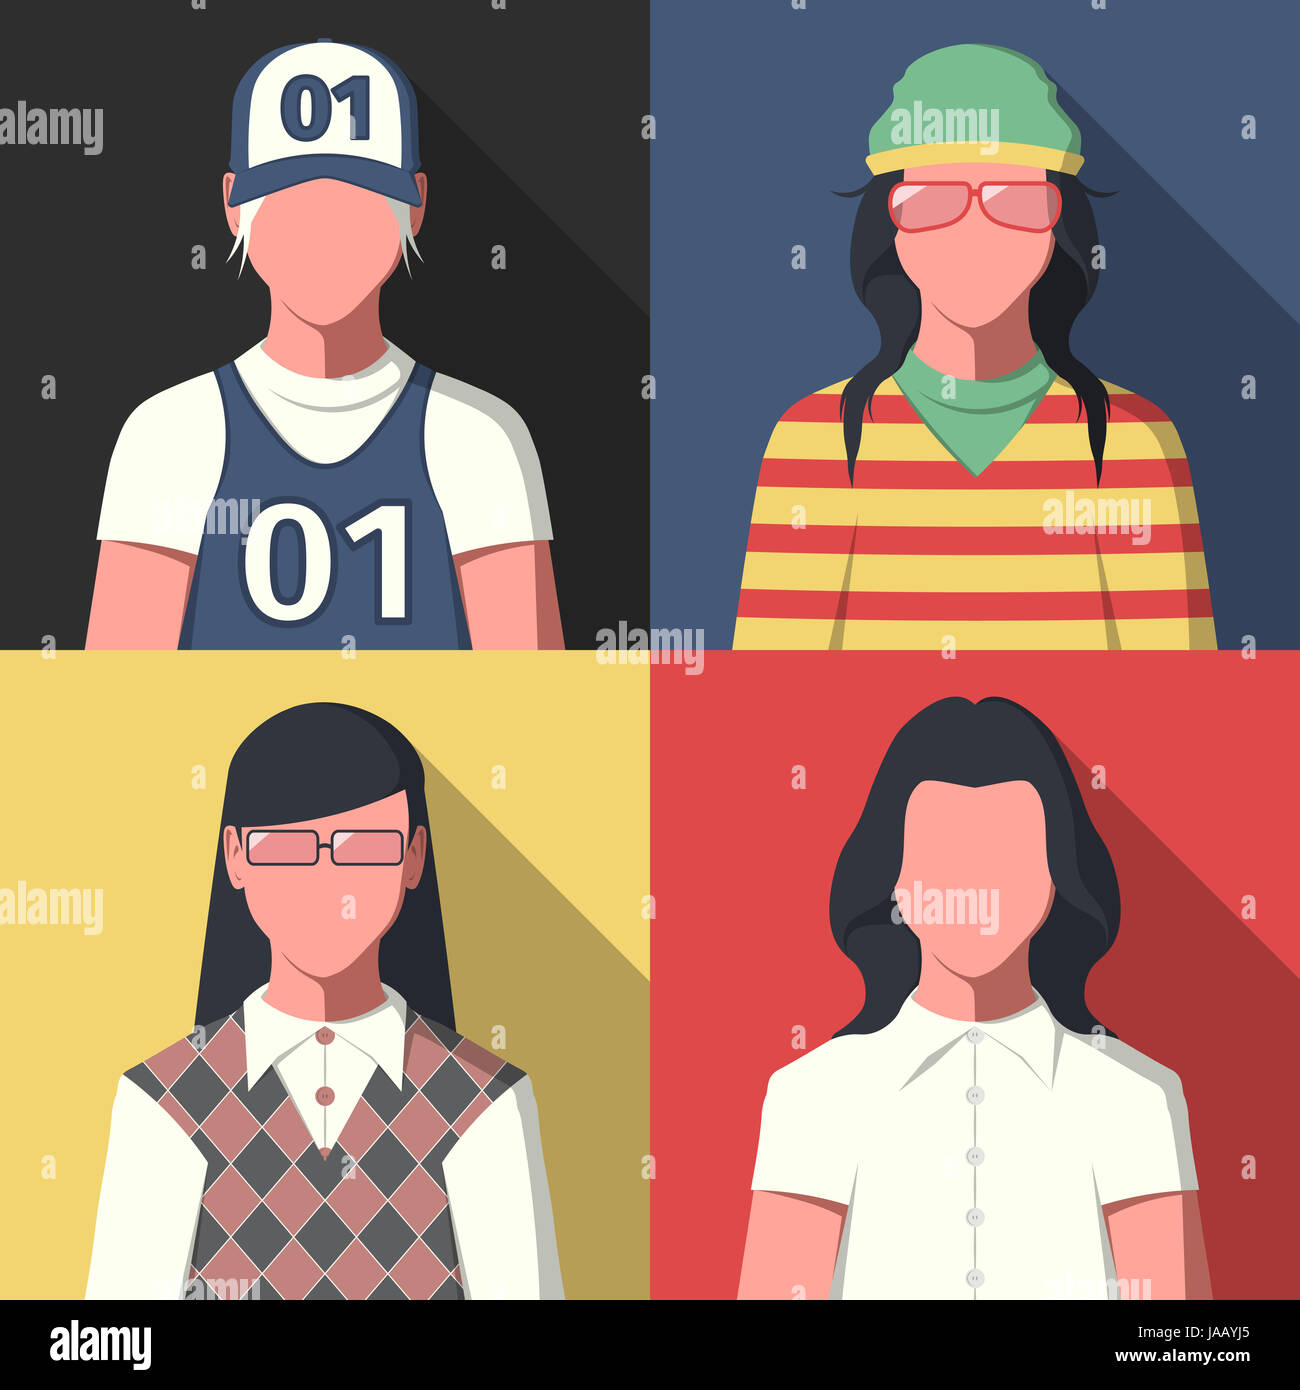 User profile picture in flat style. Avatar icons of different people. Userpics illustration. Stock Photo